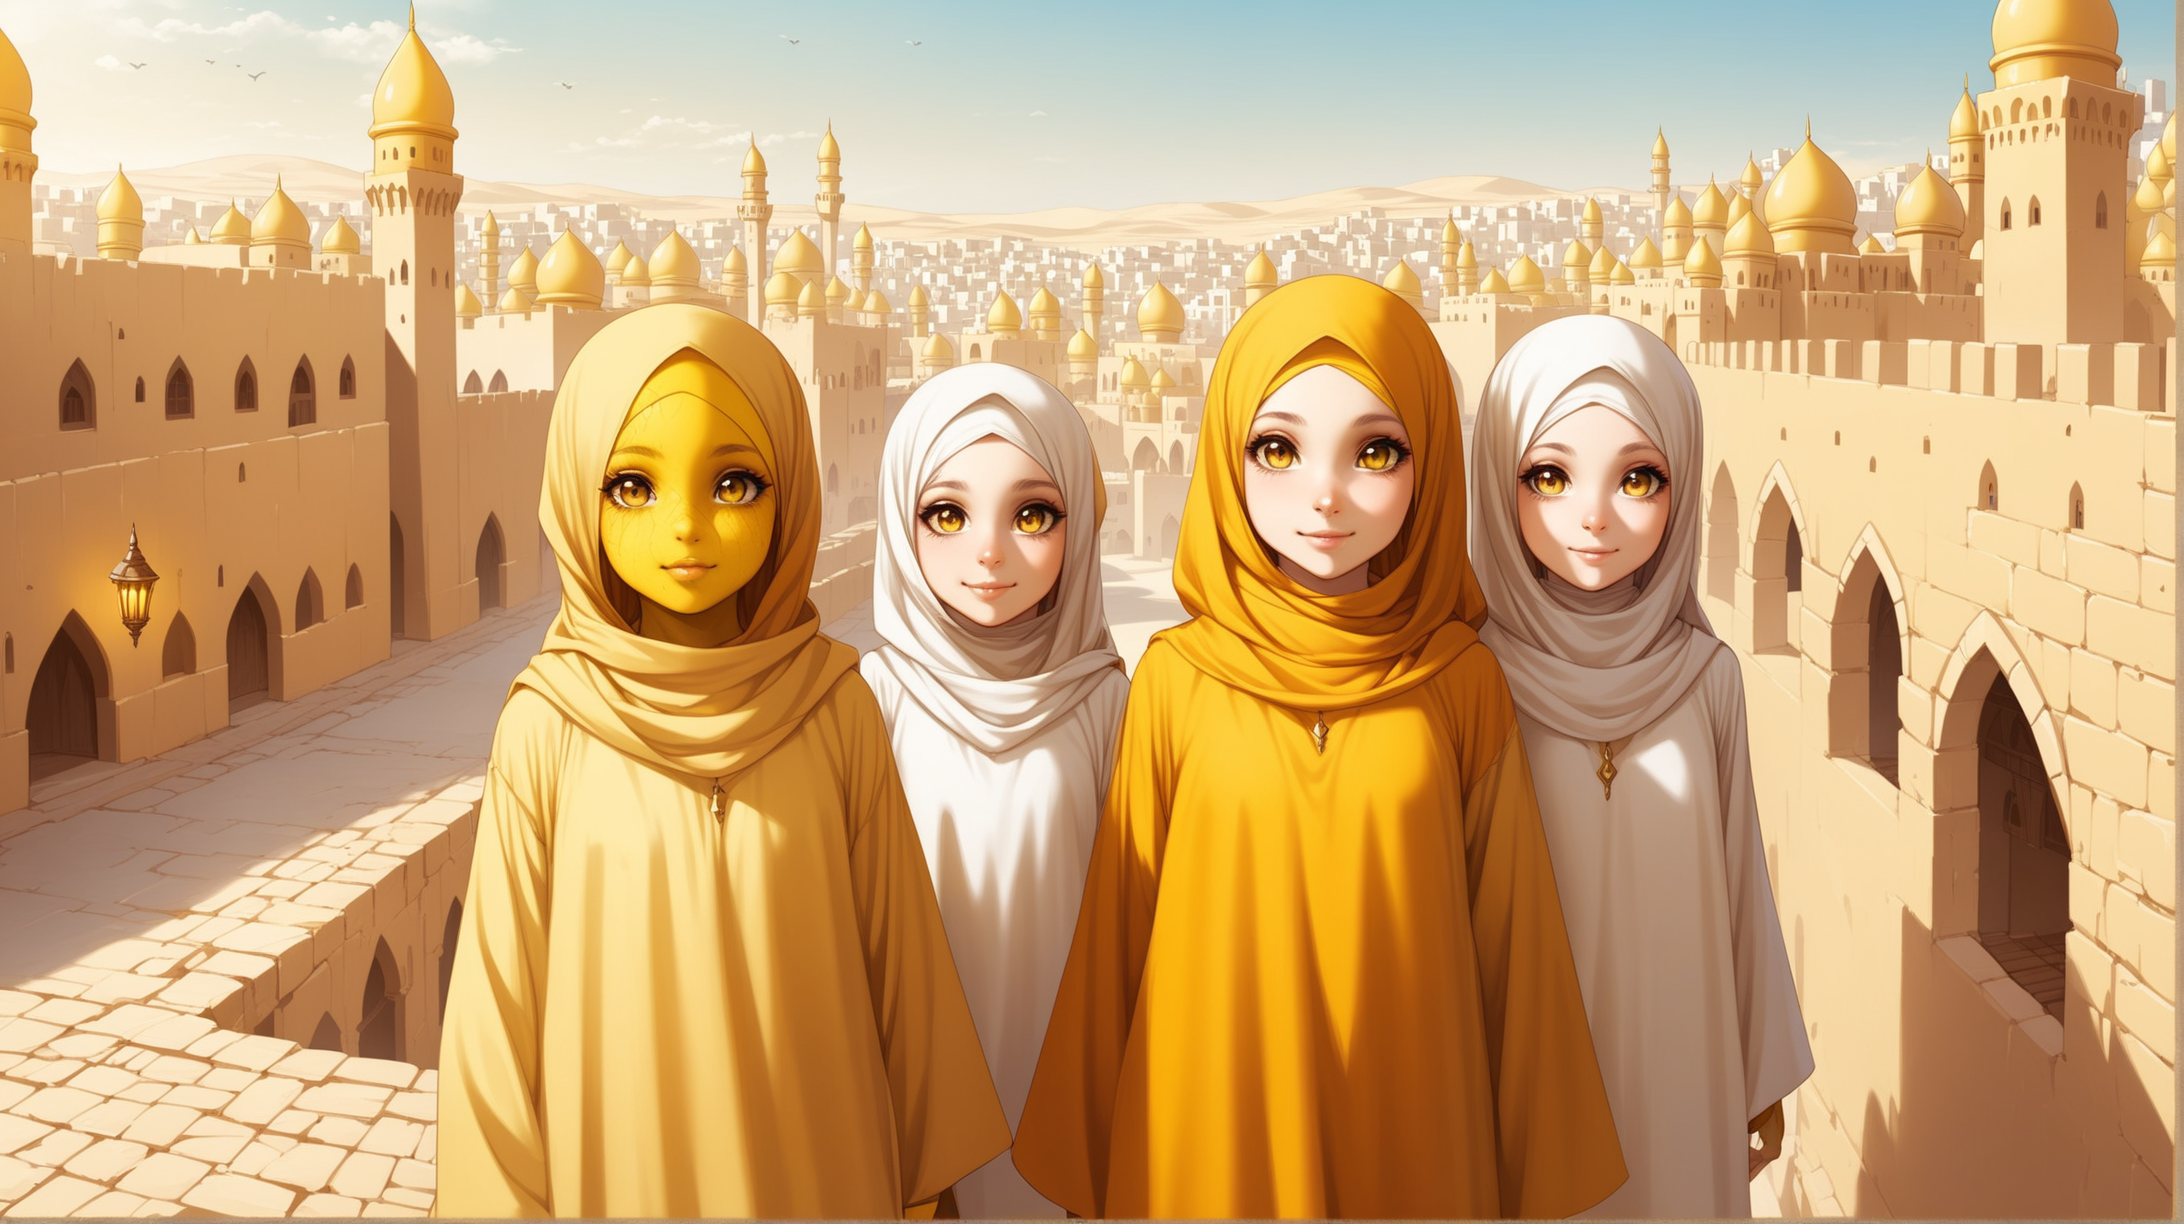 young yellow gnome girls with yellow skin, Arabic city, Medieval fantasy